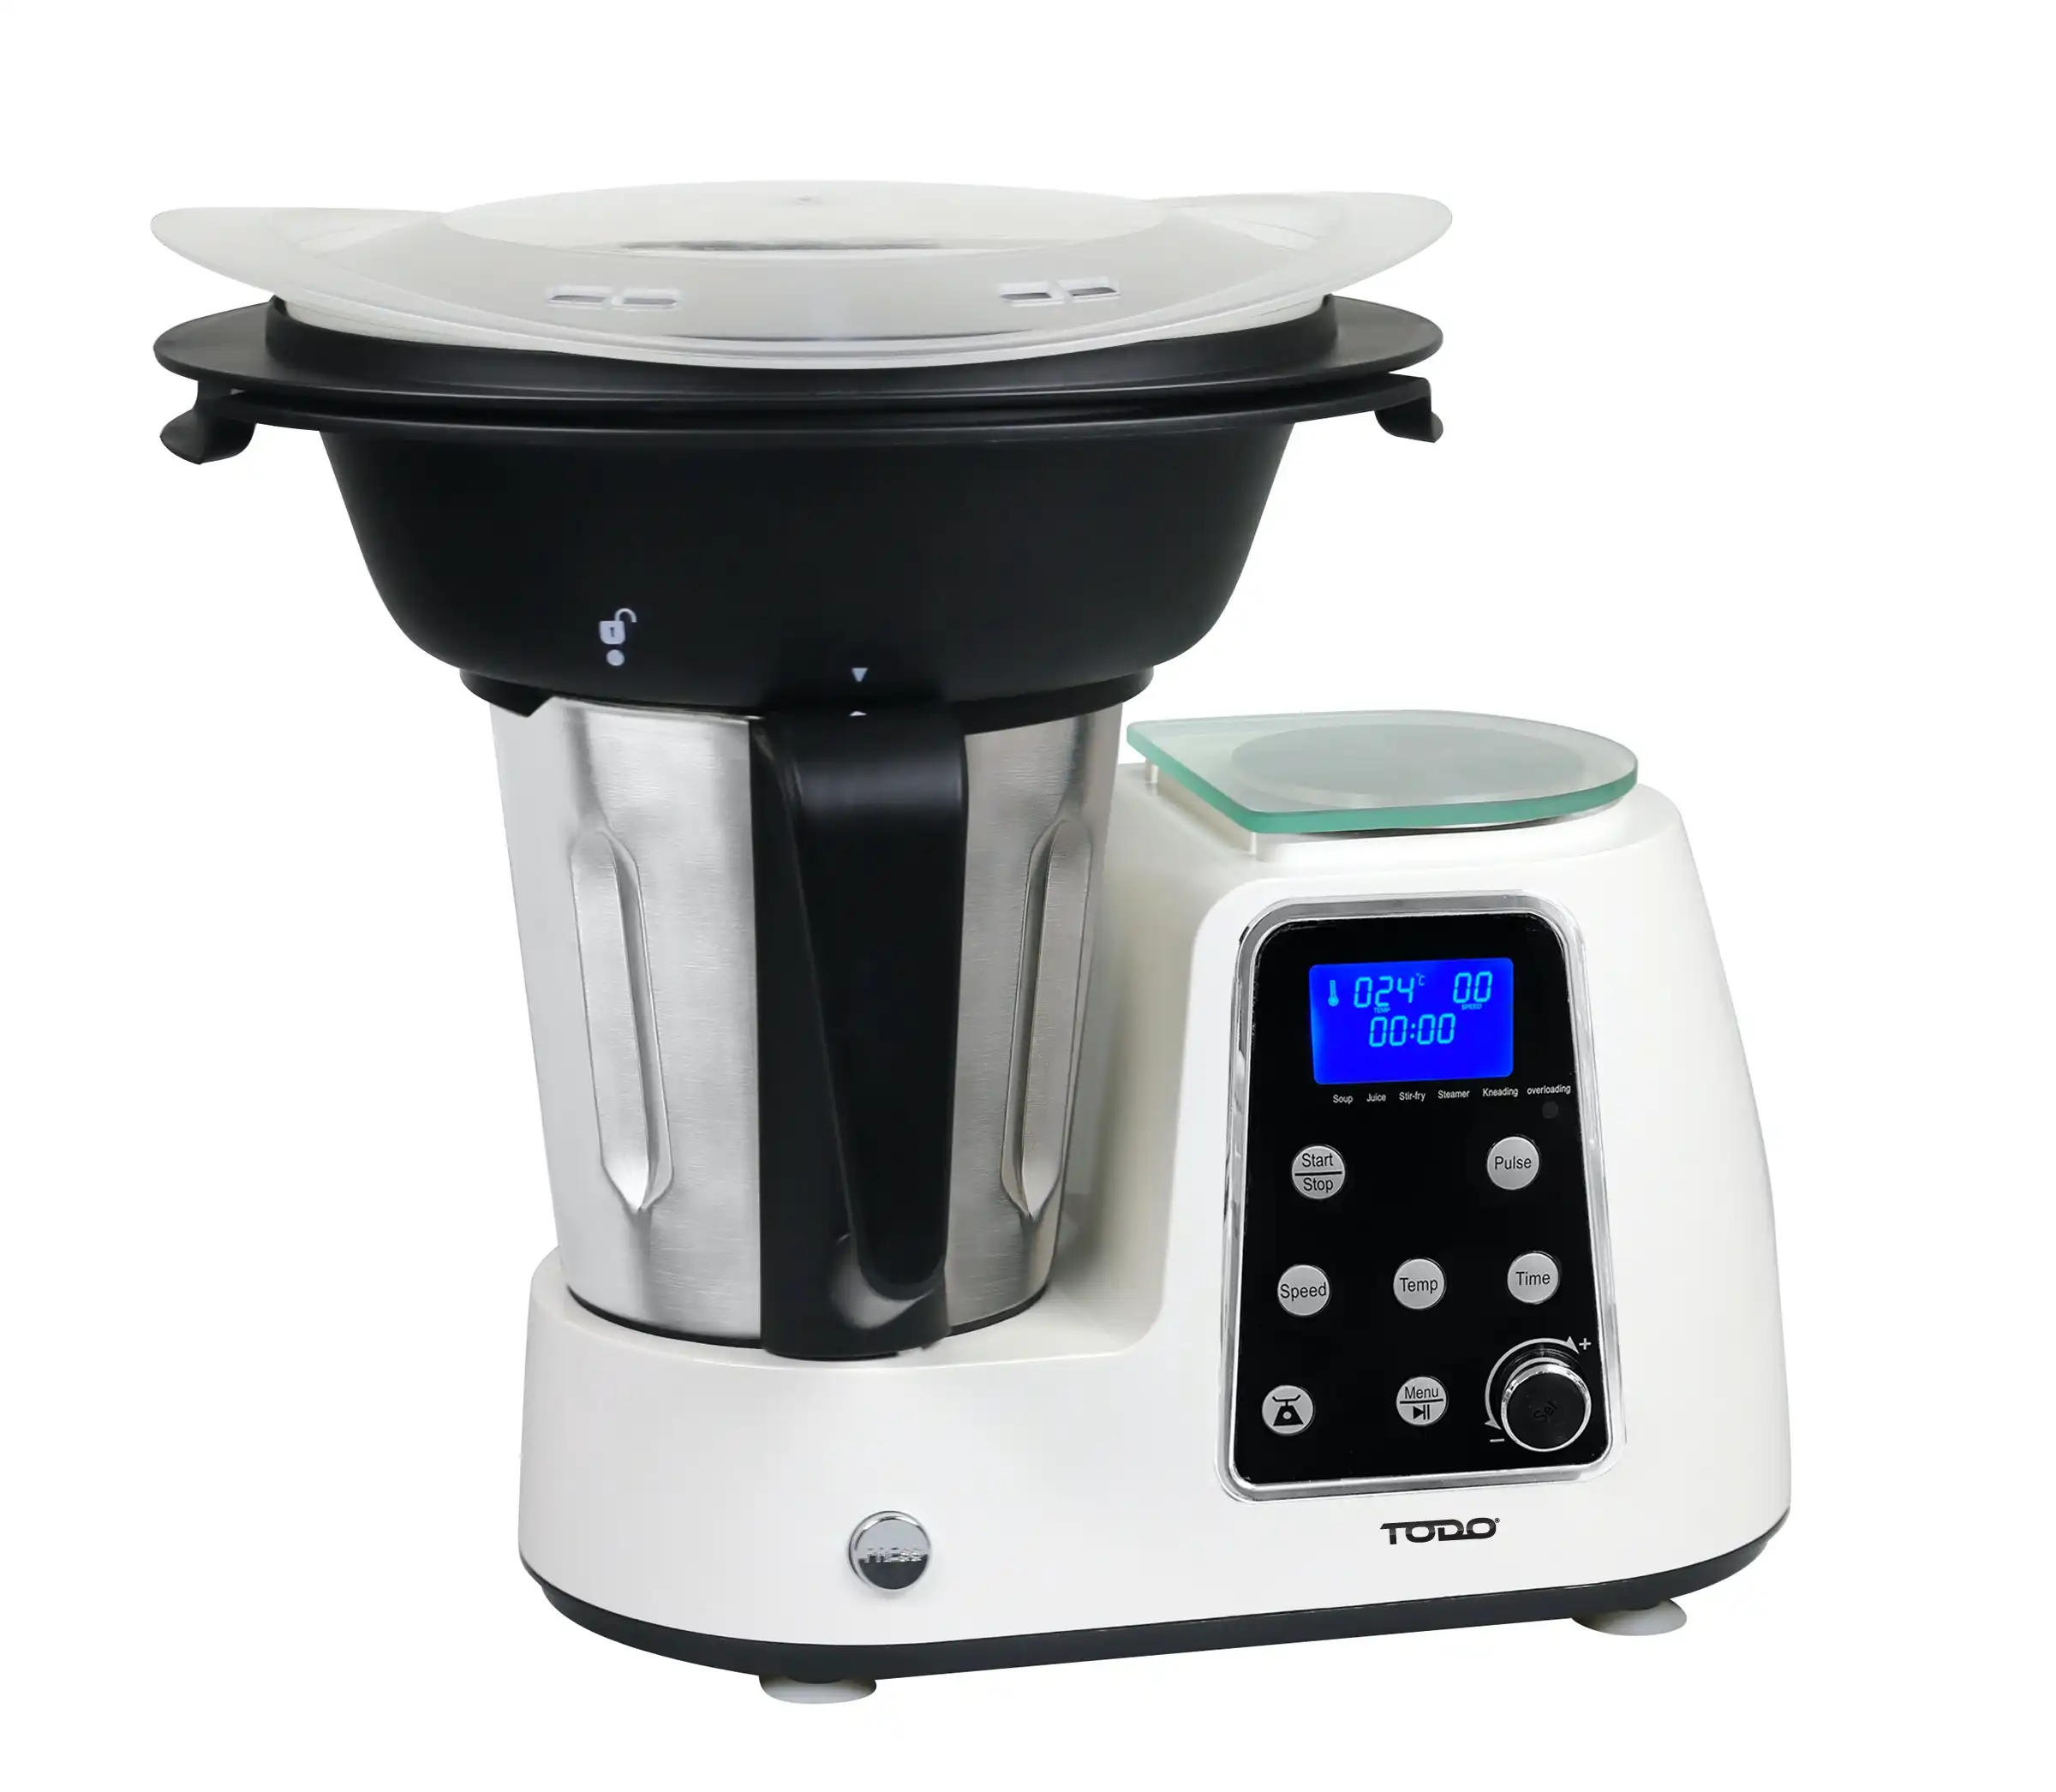 TODO Multifunction Food Processor Thermo Cooker Machine Mixer Blender Stainless Steel Scale Steamer